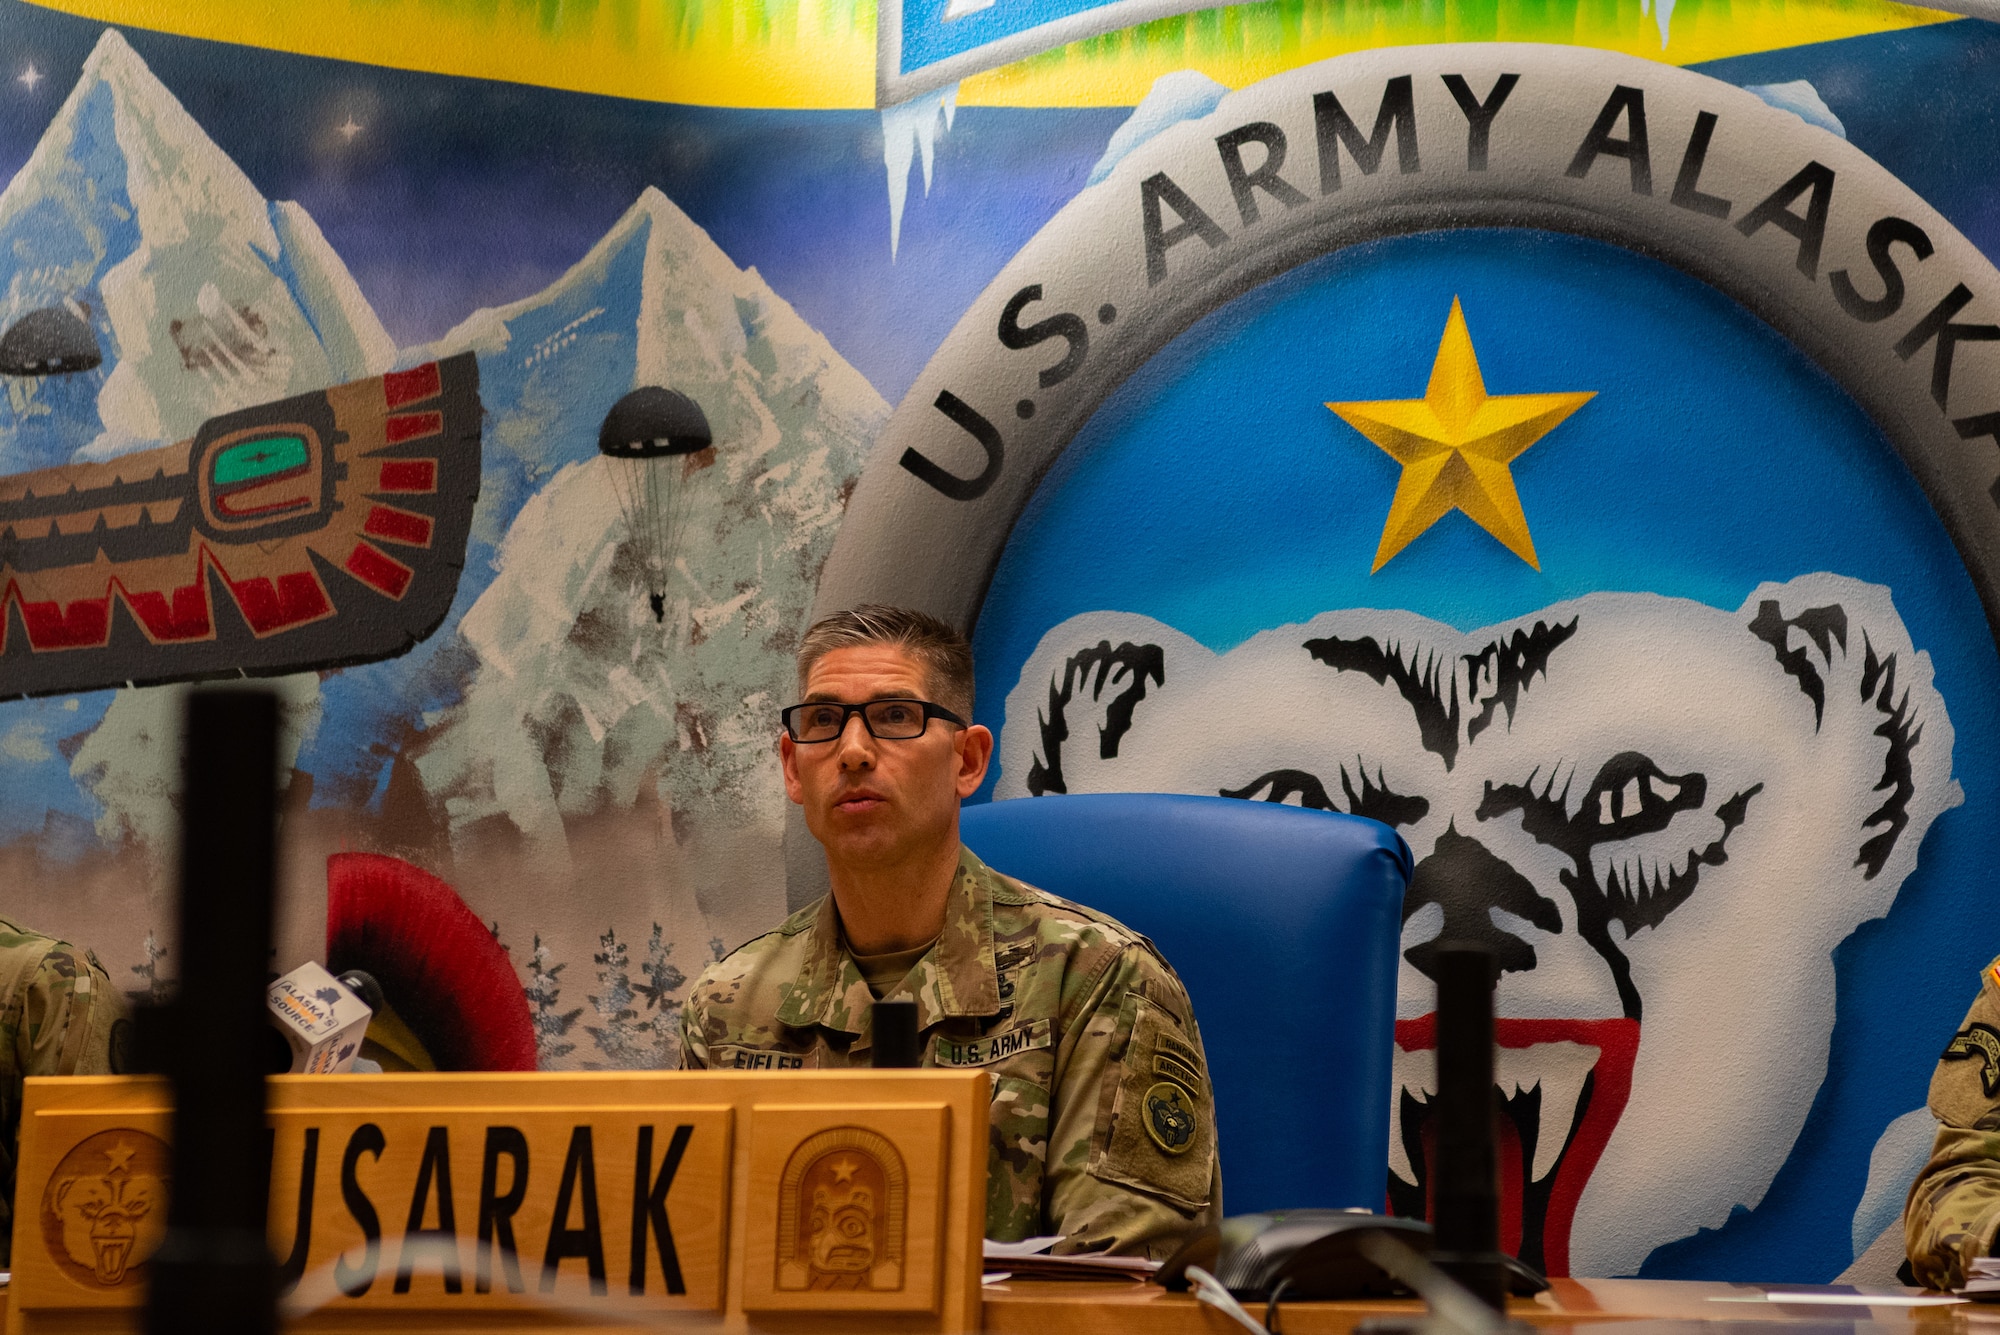 U.S. Army Maj. Gen. Bryan Eifler, the U.S. Army Alaska commanding general, speaks about measures being taken by USARAK to combat suicide during a media roundtable at Joint Base Elmendorf-Richardson, Alaska, Feb. 25, 2022. The media roundtable provided an opportunity for USARAK leadership to address the rising suicide numbers for Soldiers and discuss measures being taken to support the troops.